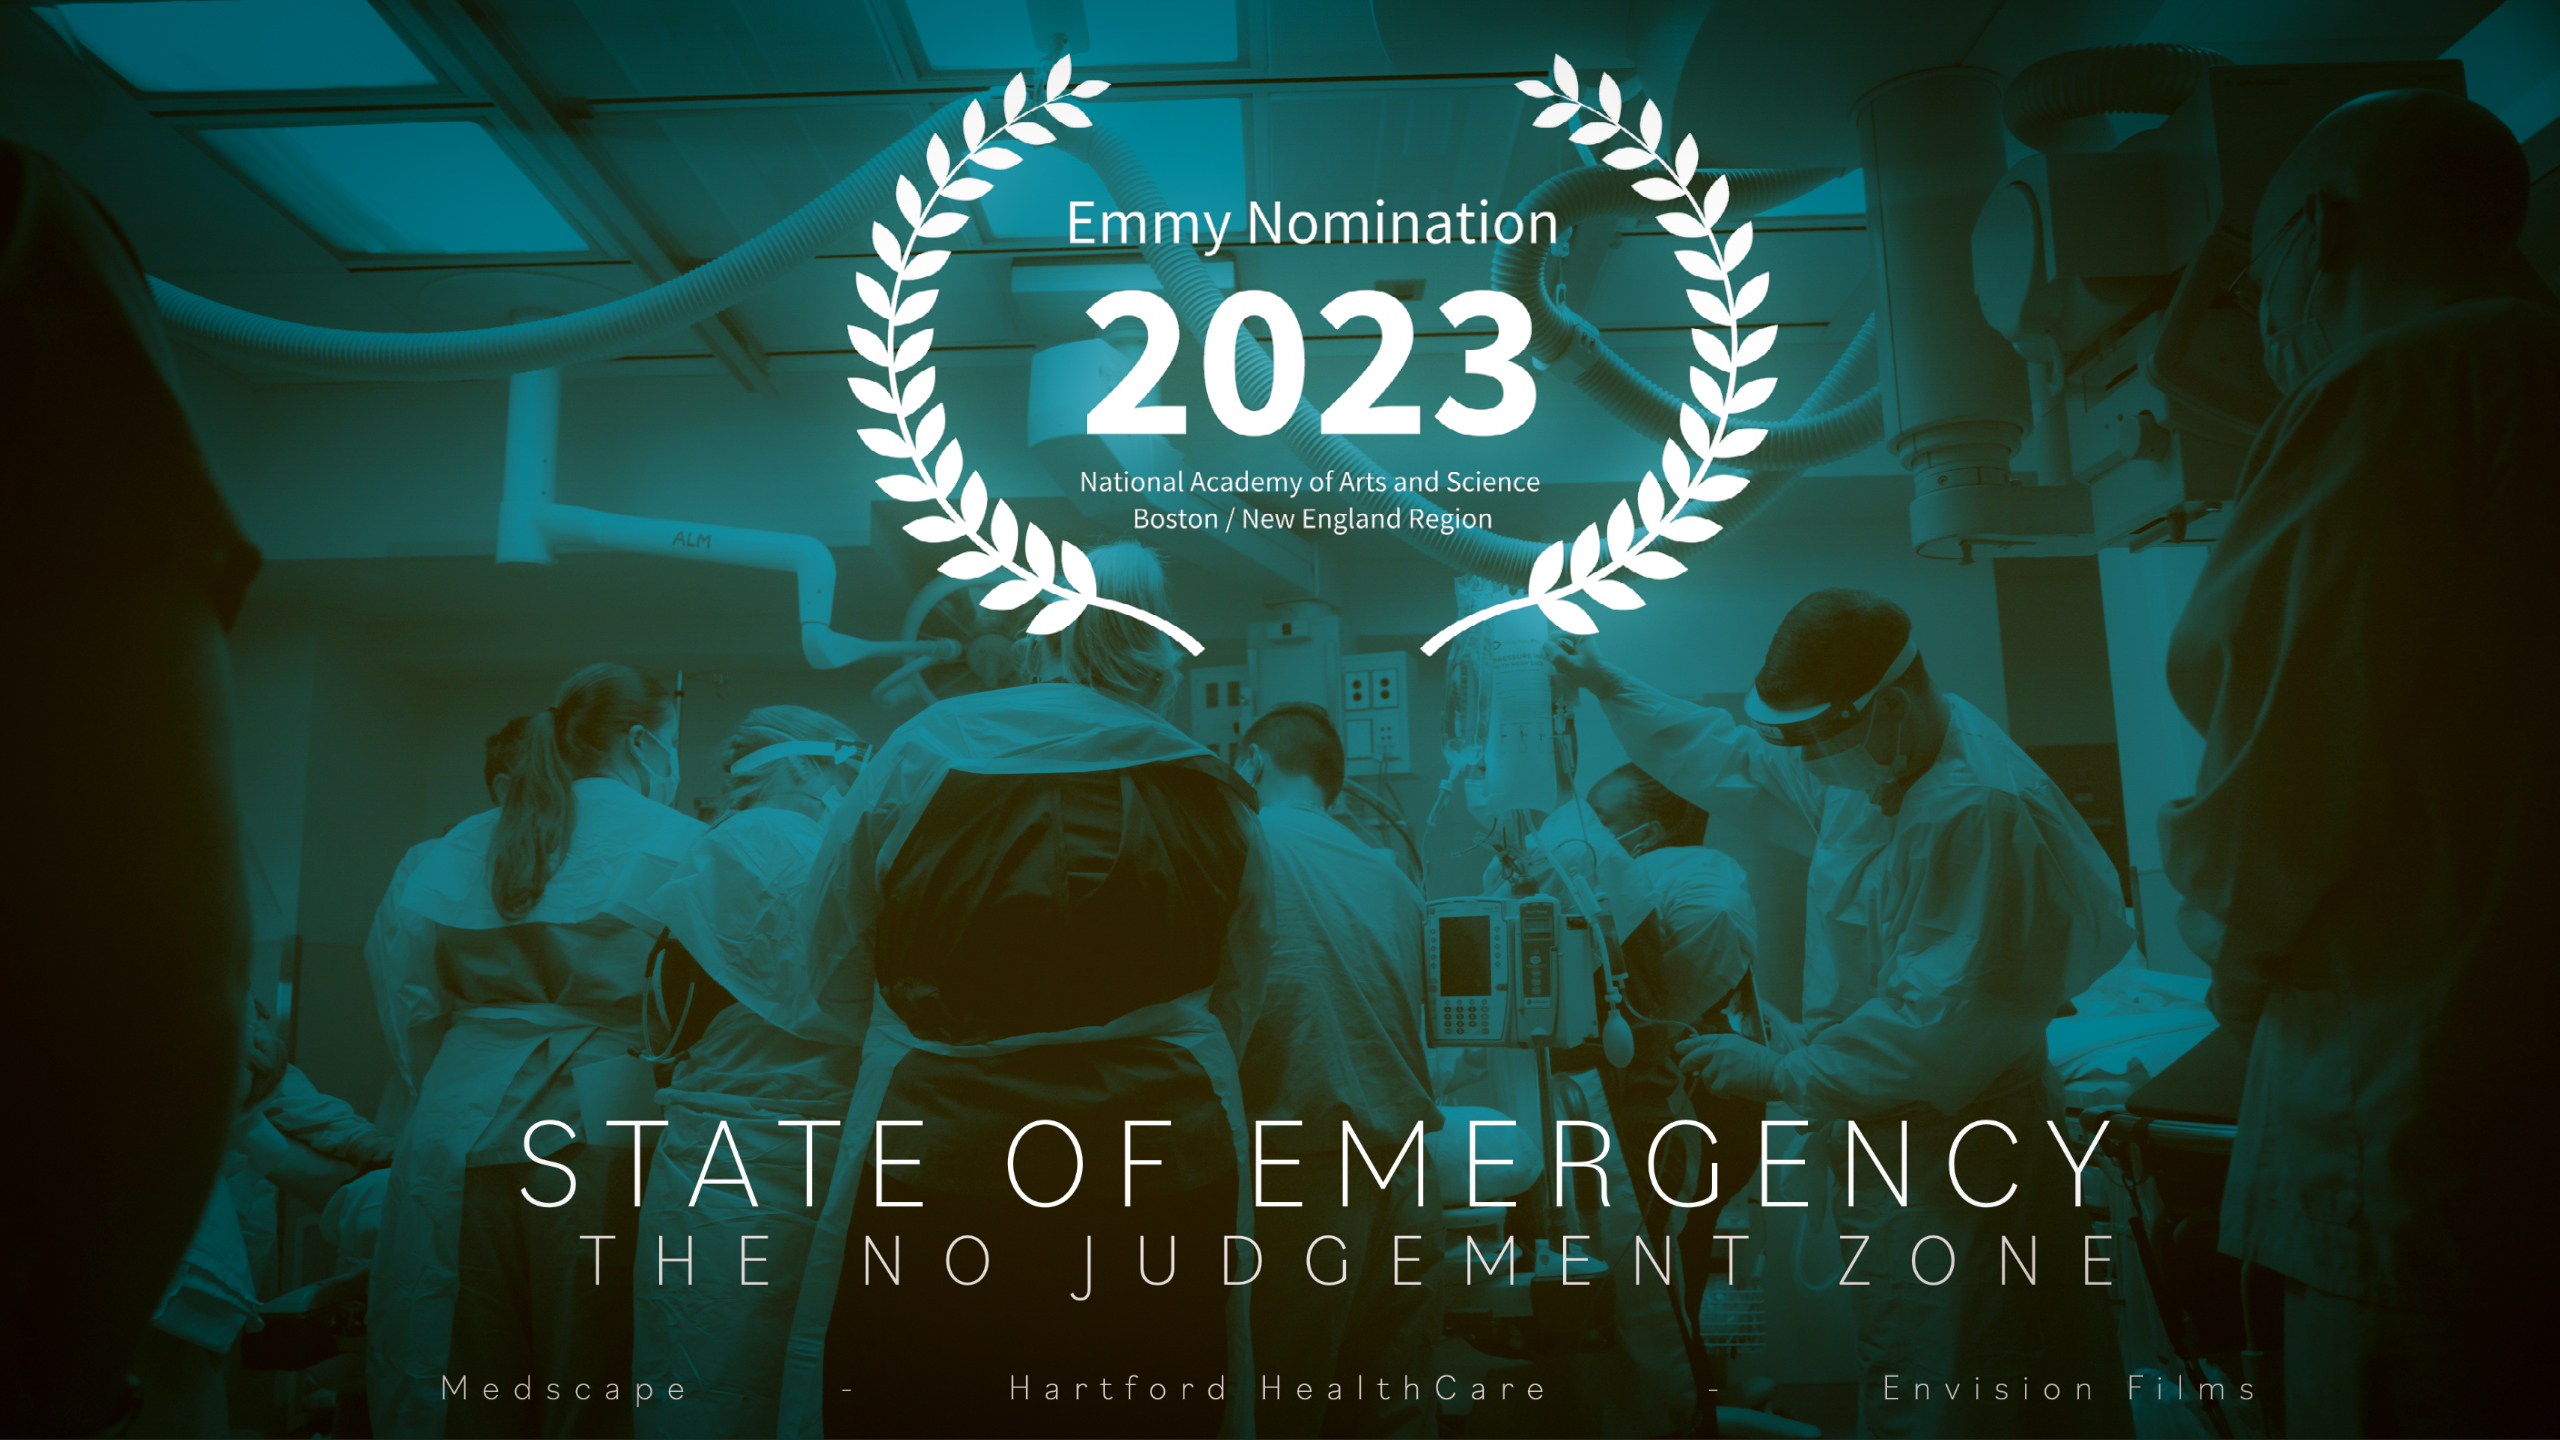 State of Emergency - The No Judgement Zone - Medscape